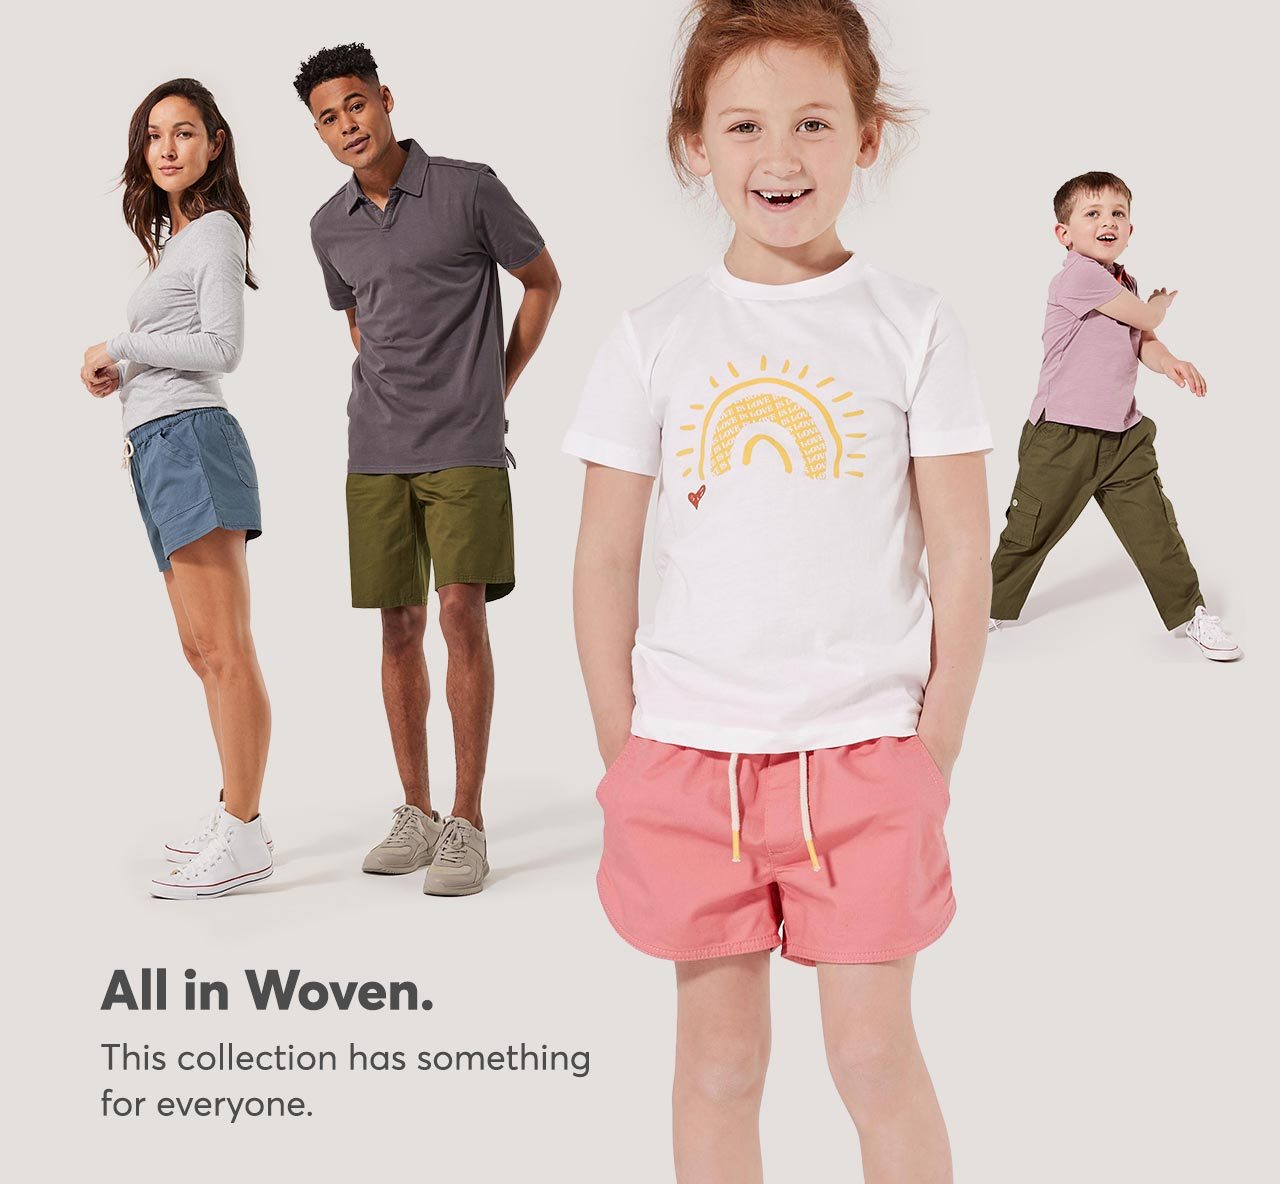 All in Woven. This collection has something for everyone.